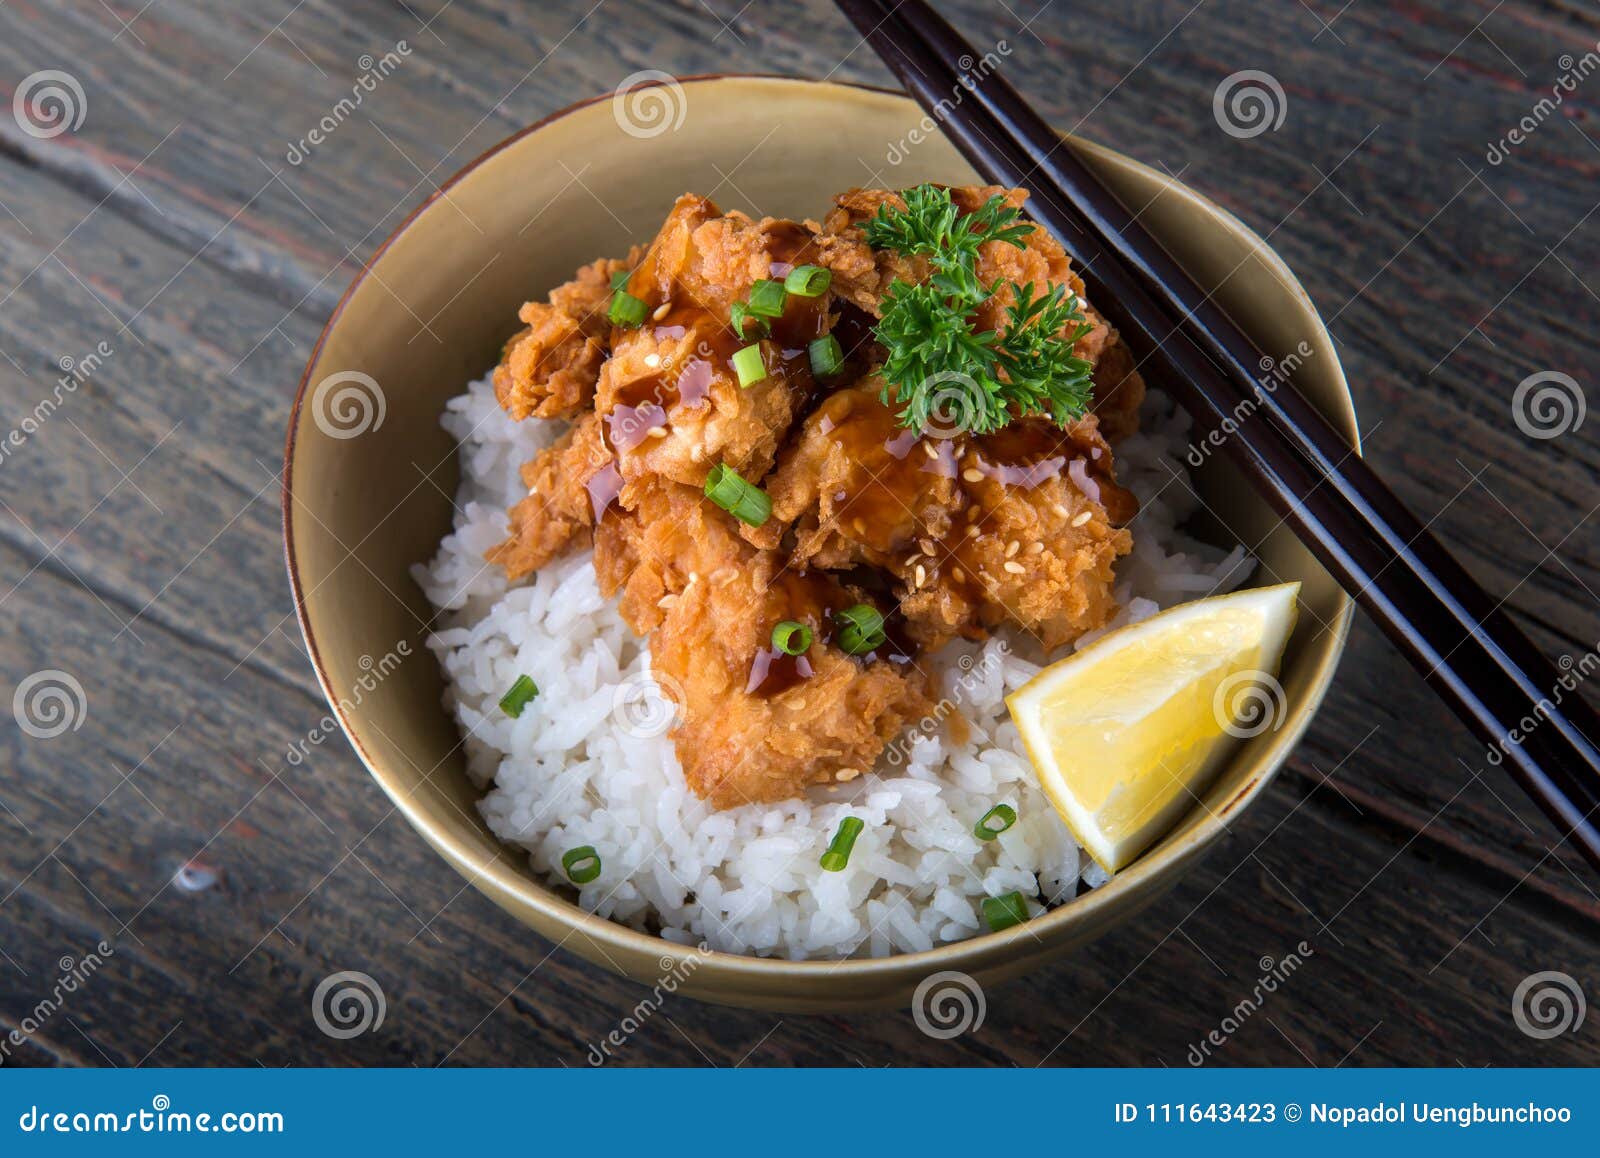 Japanese Style Crispy Chicken with Rice. Stock Image - Image of dish ...